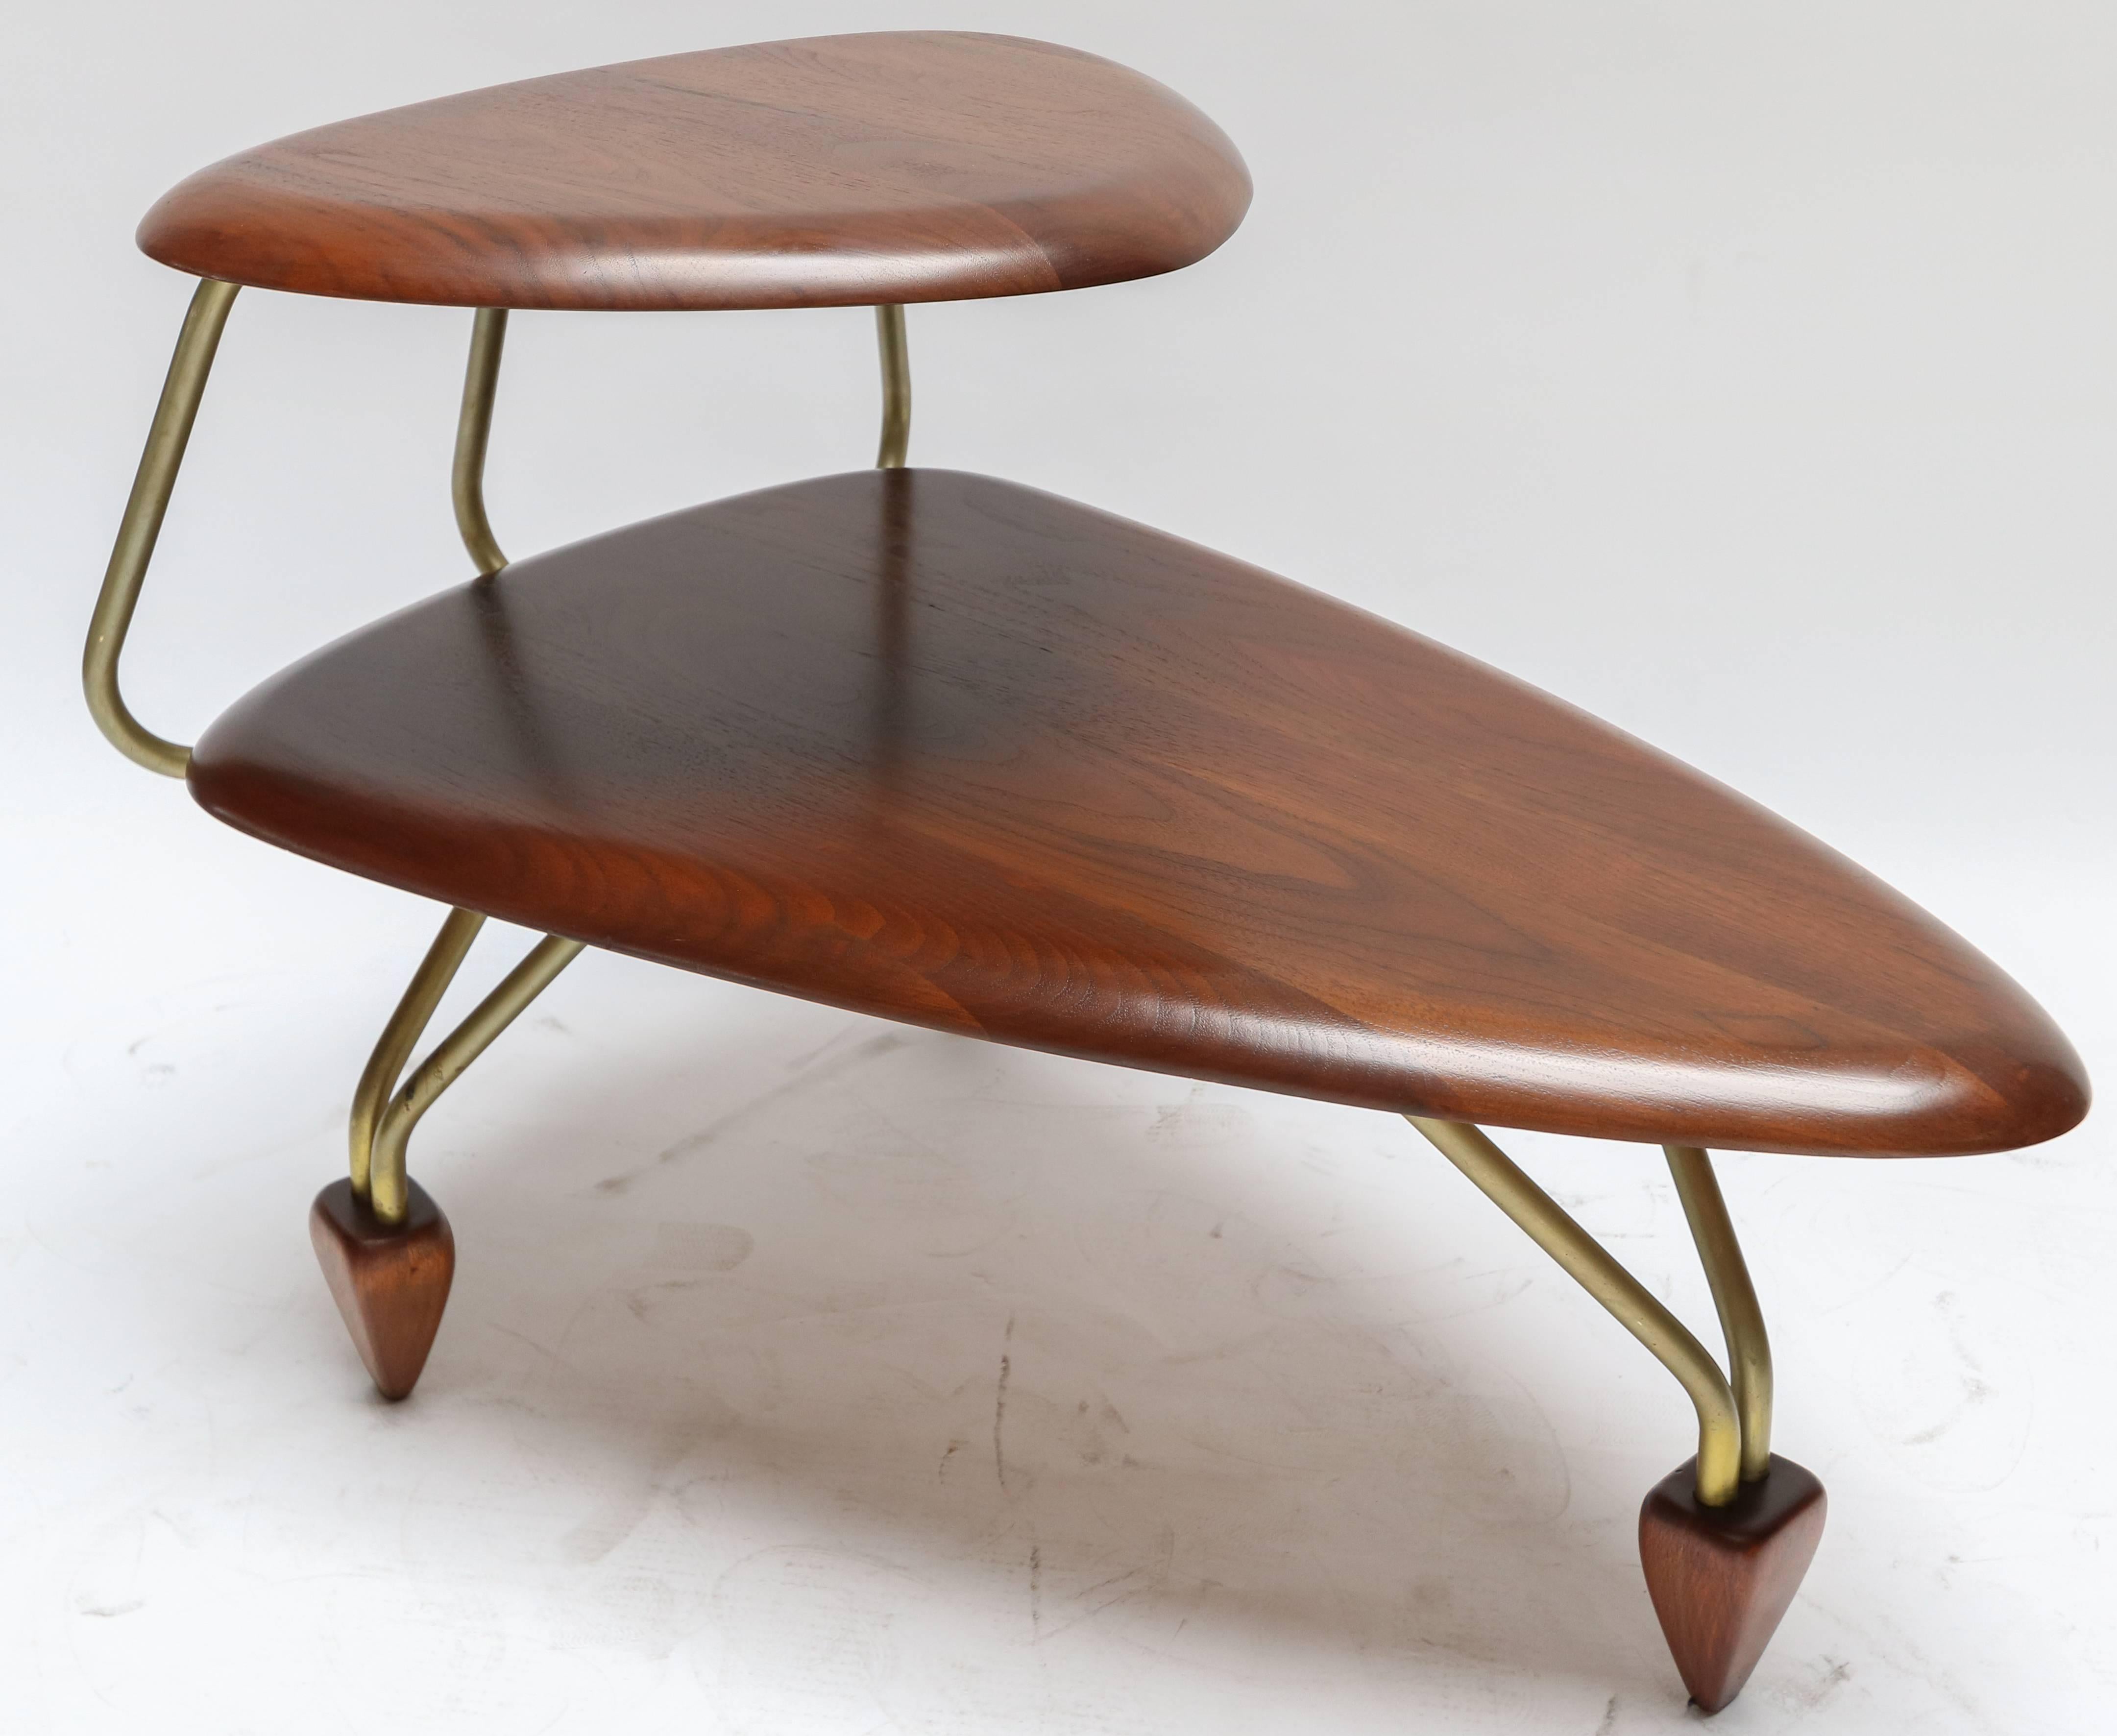 Pair of walnut side tables with surfboard styling by John Keal for Brown Saltman.

Lower shelf height is 12.75